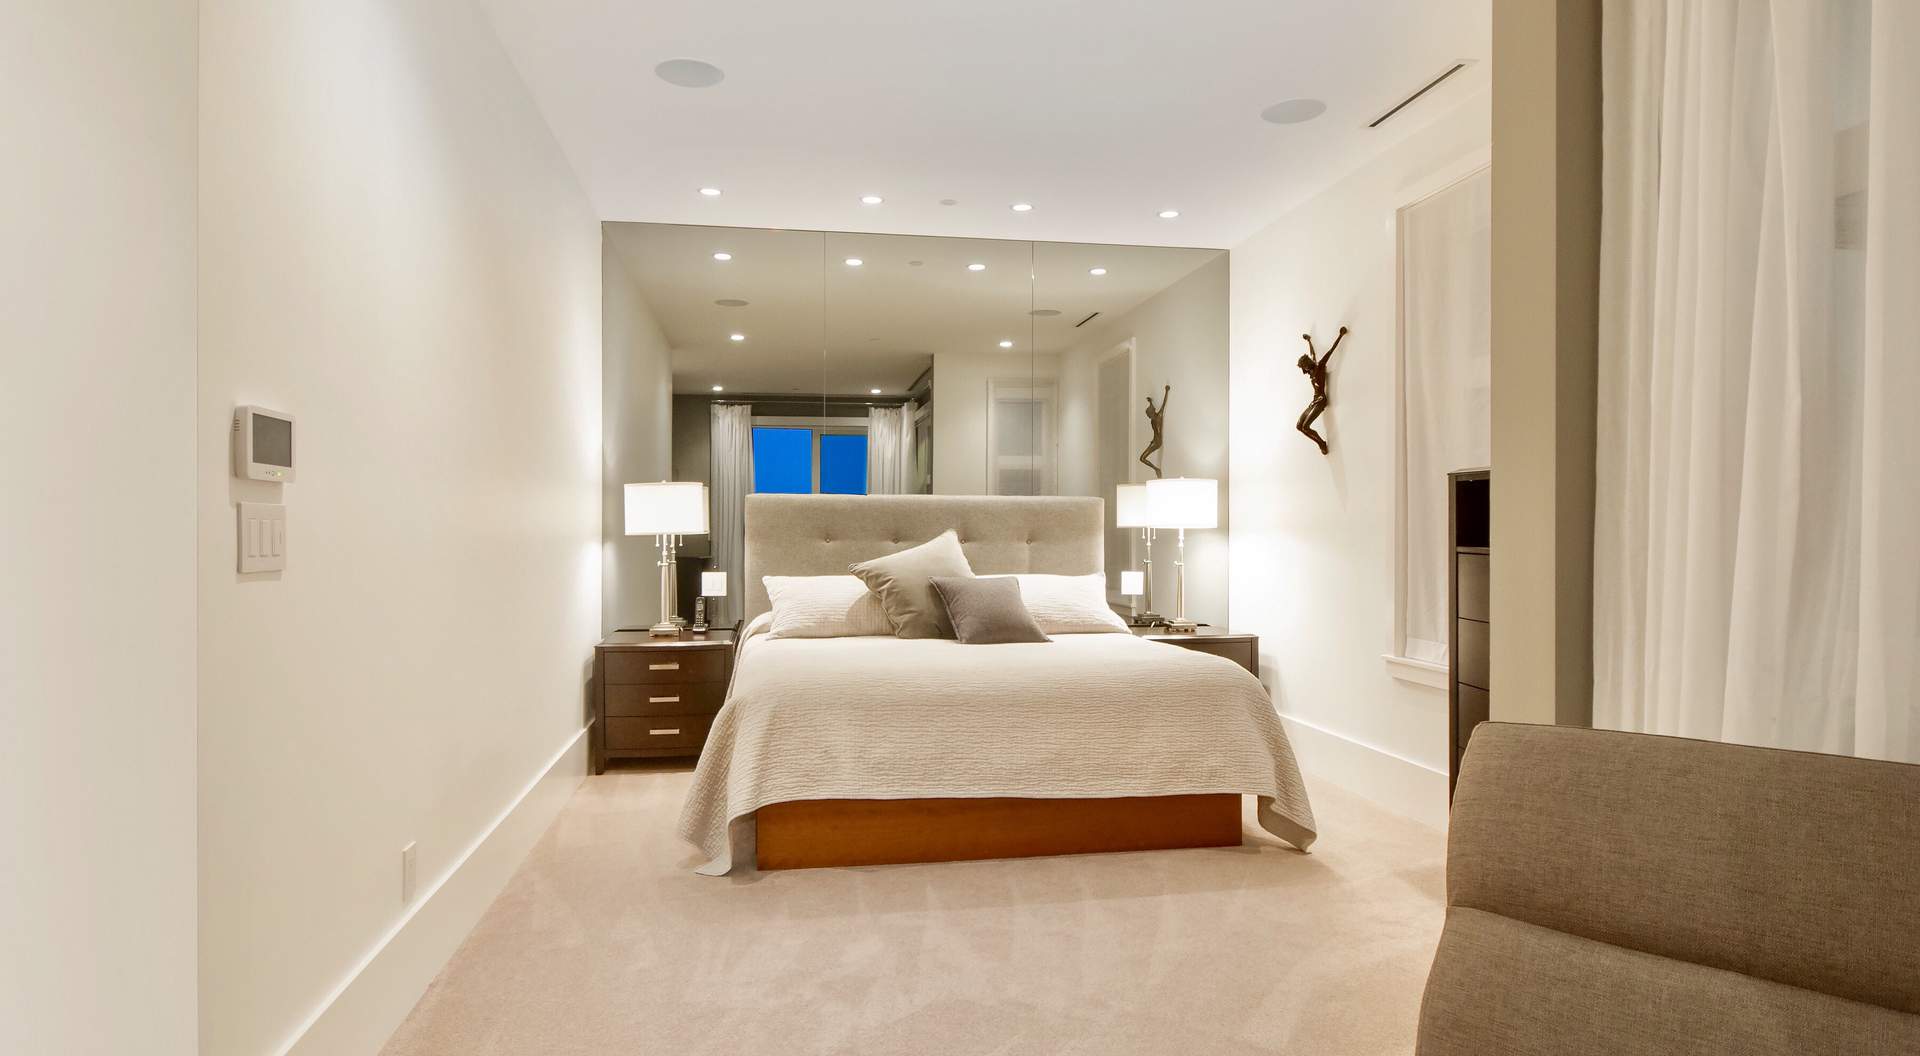 Contemporary bedroom design, tan rugs with white walls, ceilings and trim, huge wall mirror, LED lighting